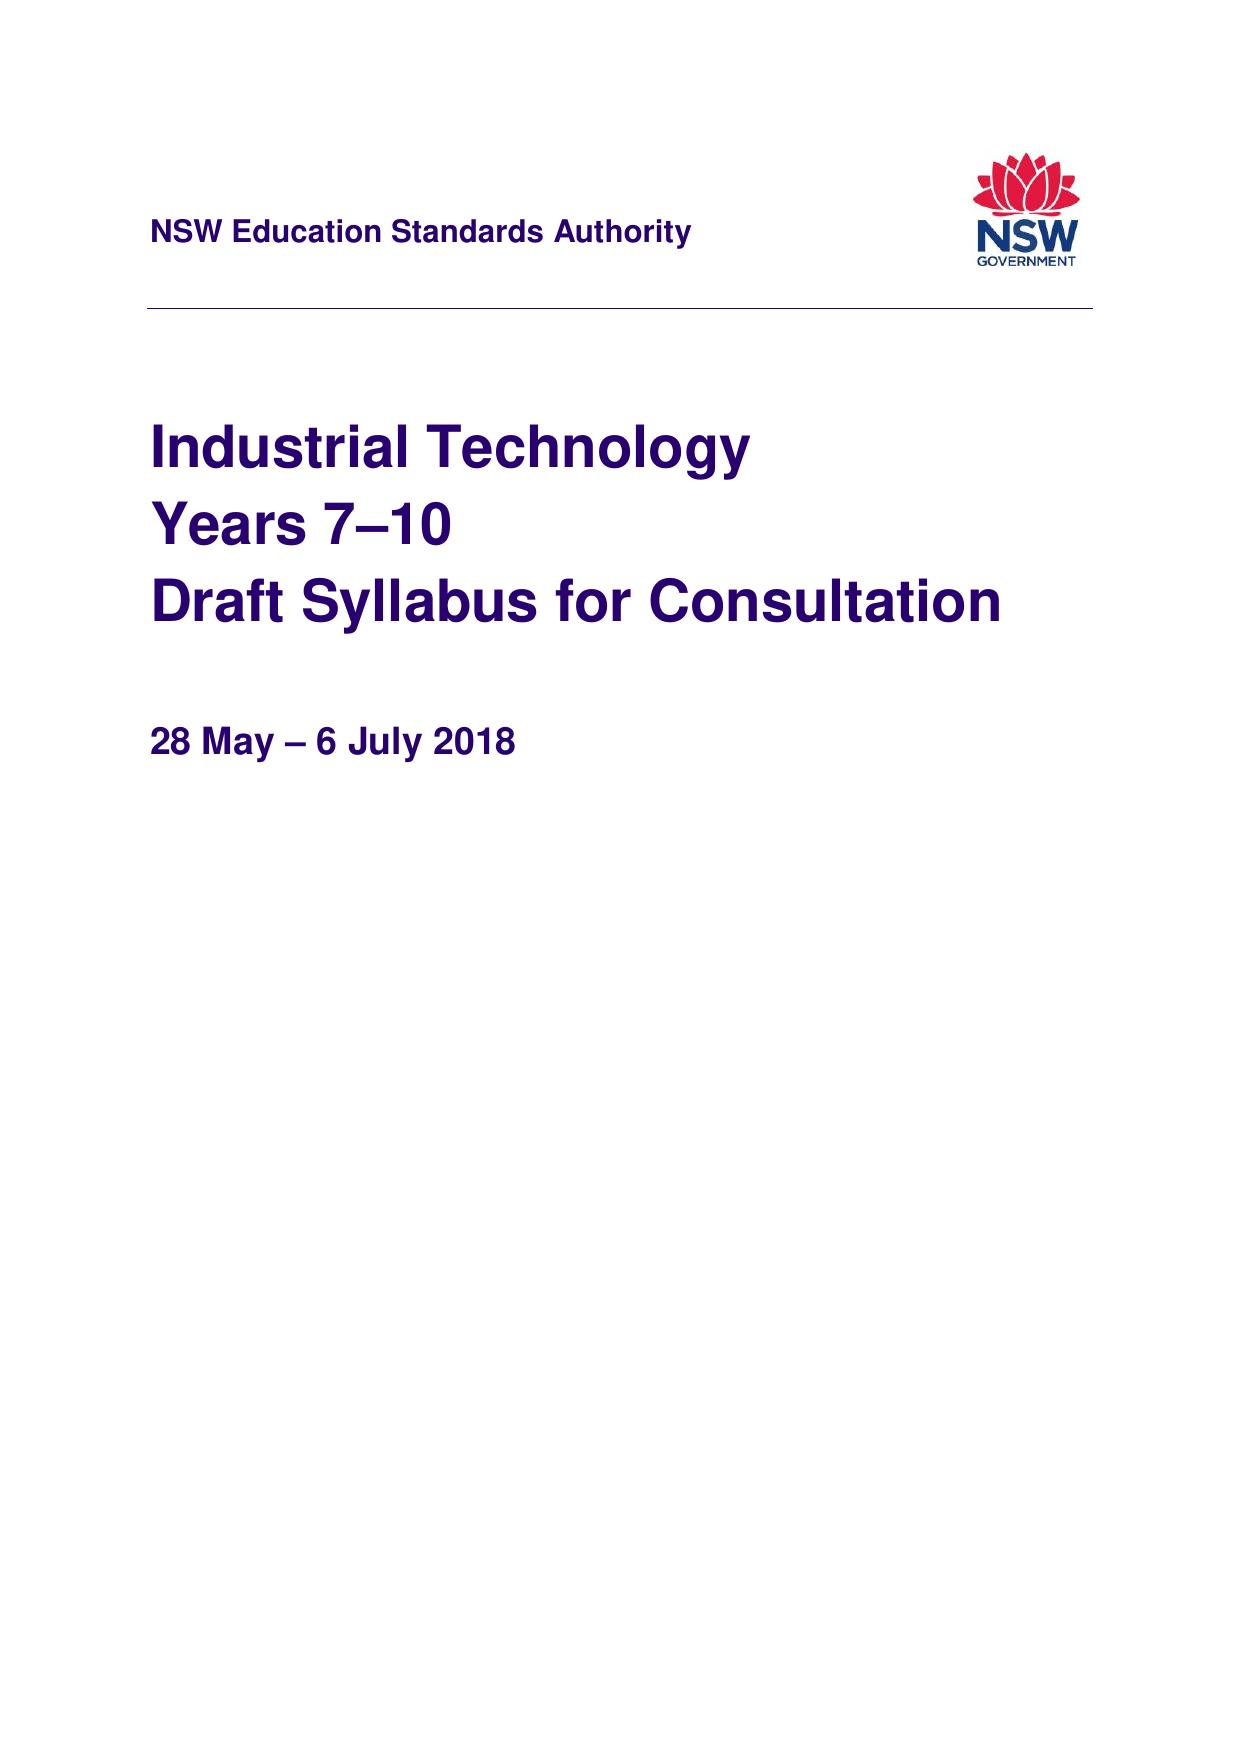 Industrial Technology Years 7–10 Draft Syllabus for Consultation 2018